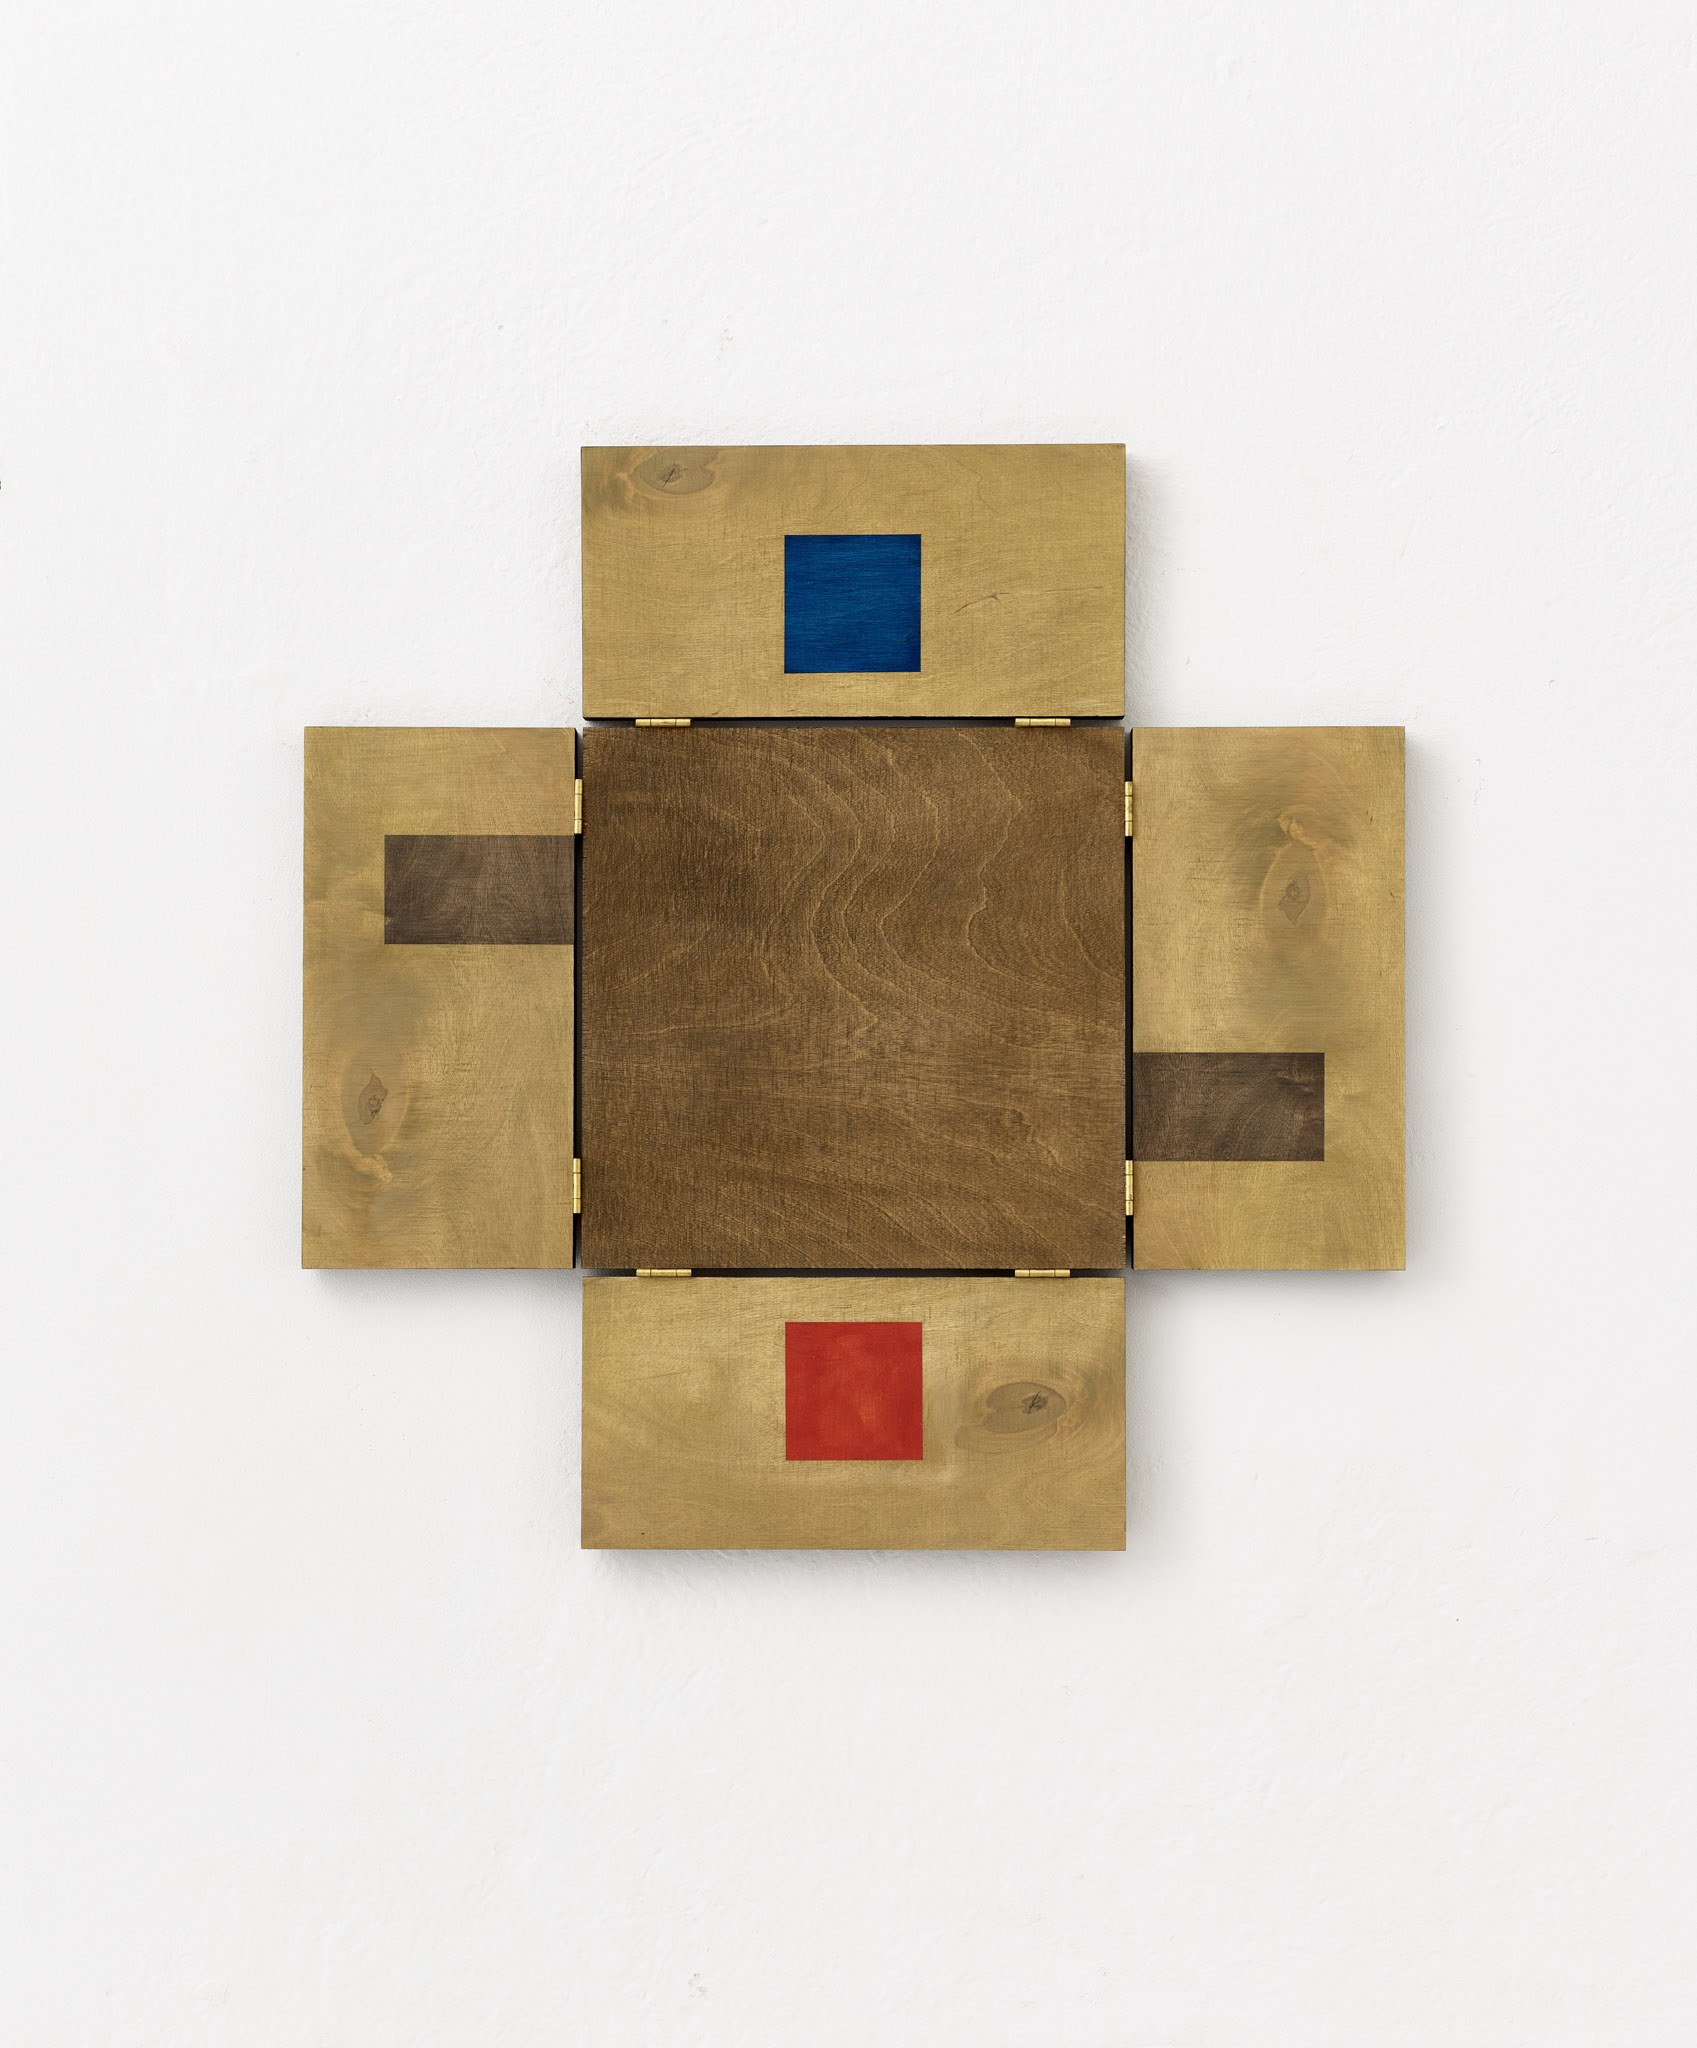 Sunah Choi, "Maquette (Room with two paintings on the wall)", 2023, wood, color, brass, 60 x 60,8 x 2 cm